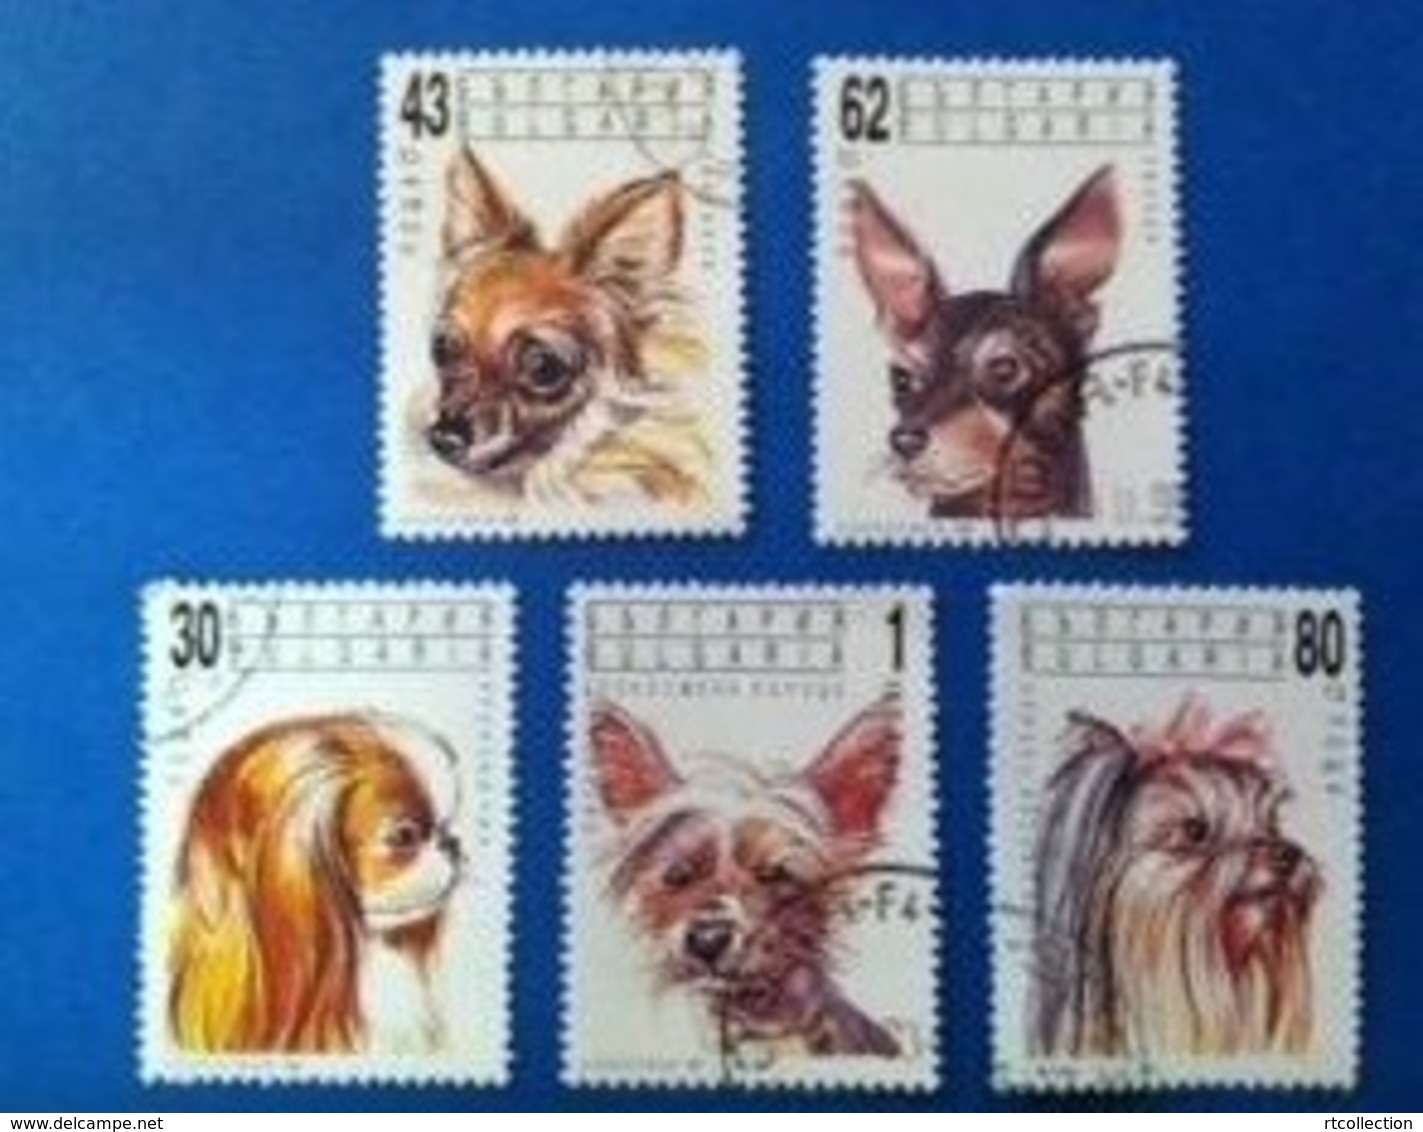 Bulgaria 1991 - 5 Fauna Domestic Animals Mammals Dog Dogs Animal Fauna Nature Stamps Used - Used Stamps